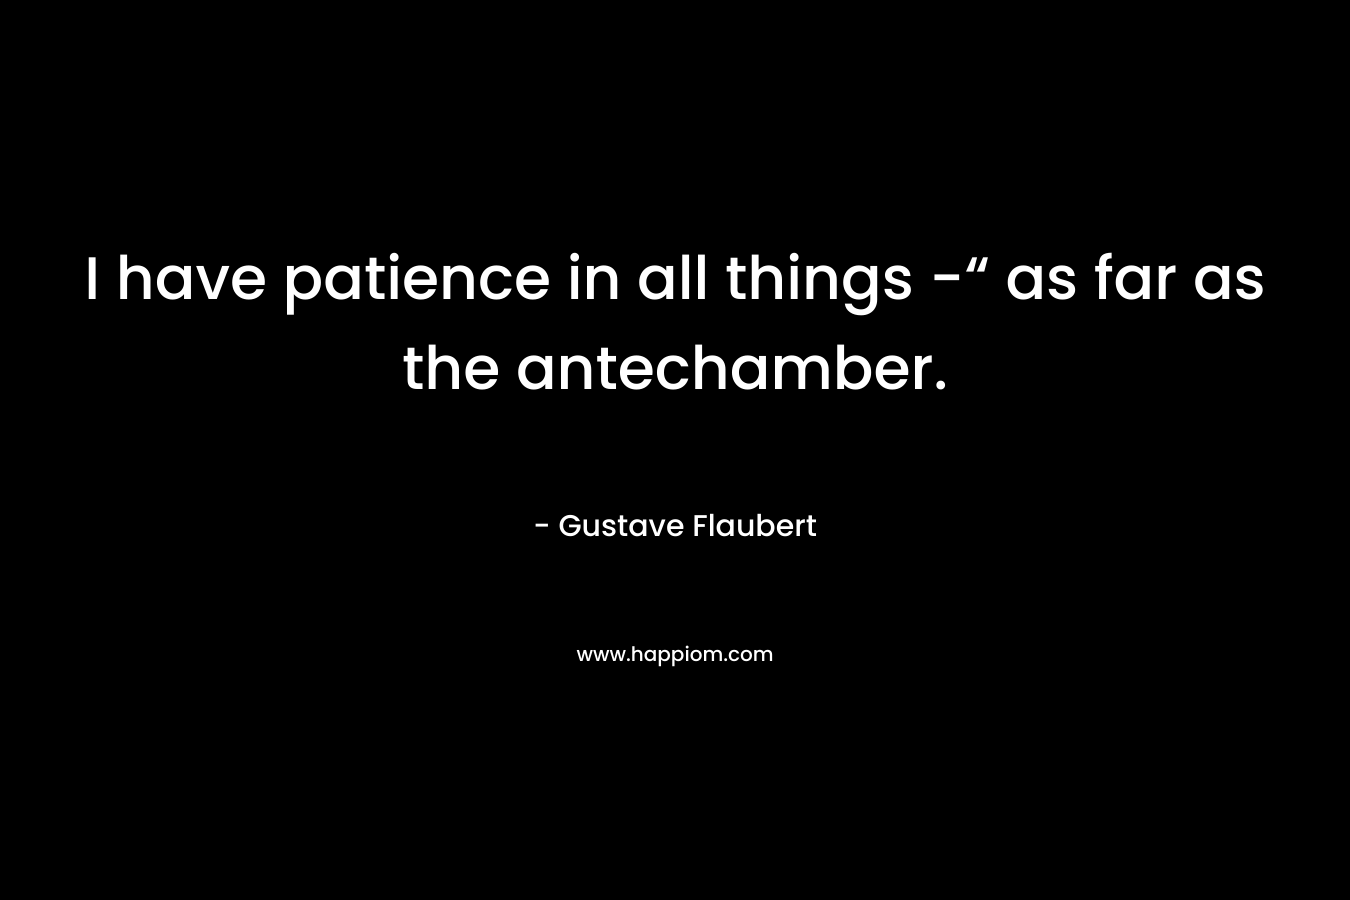 I have patience in all things -“ as far as the antechamber. – Gustave Flaubert